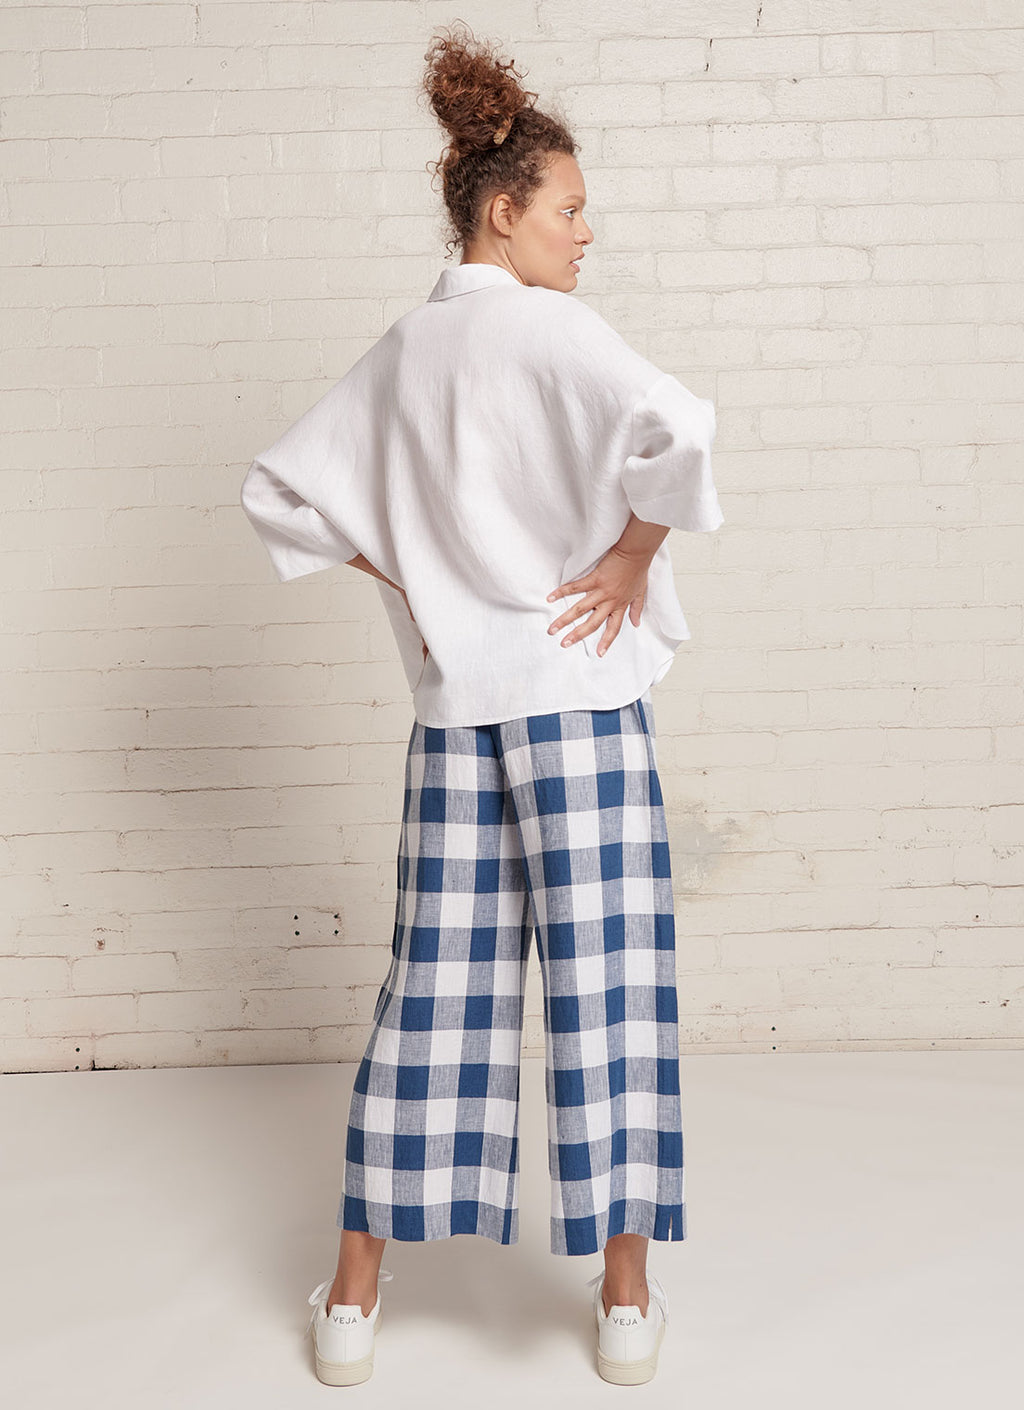 An indigo and white gingham, loose fitting crop pants with elasticated waistband and tie belt of the same fabric made from large gingham yarn dye washed linen